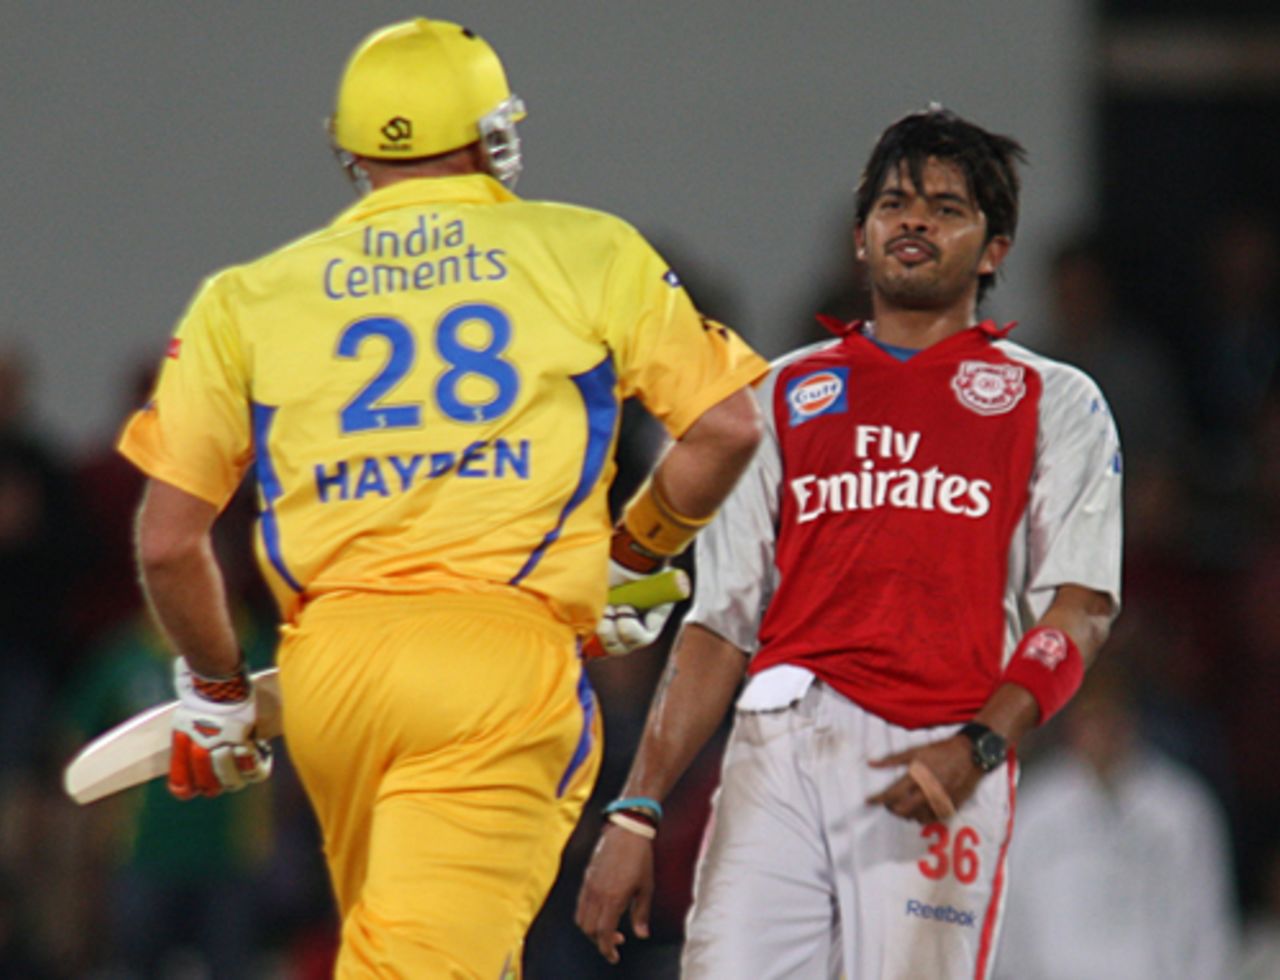 Sreesanth bore much of the brunt of Matthew Hayden's onslaught, Chennai Super Kings v Kings XI Punjab, IPL, 34th match, Centurion, May 7, 2009